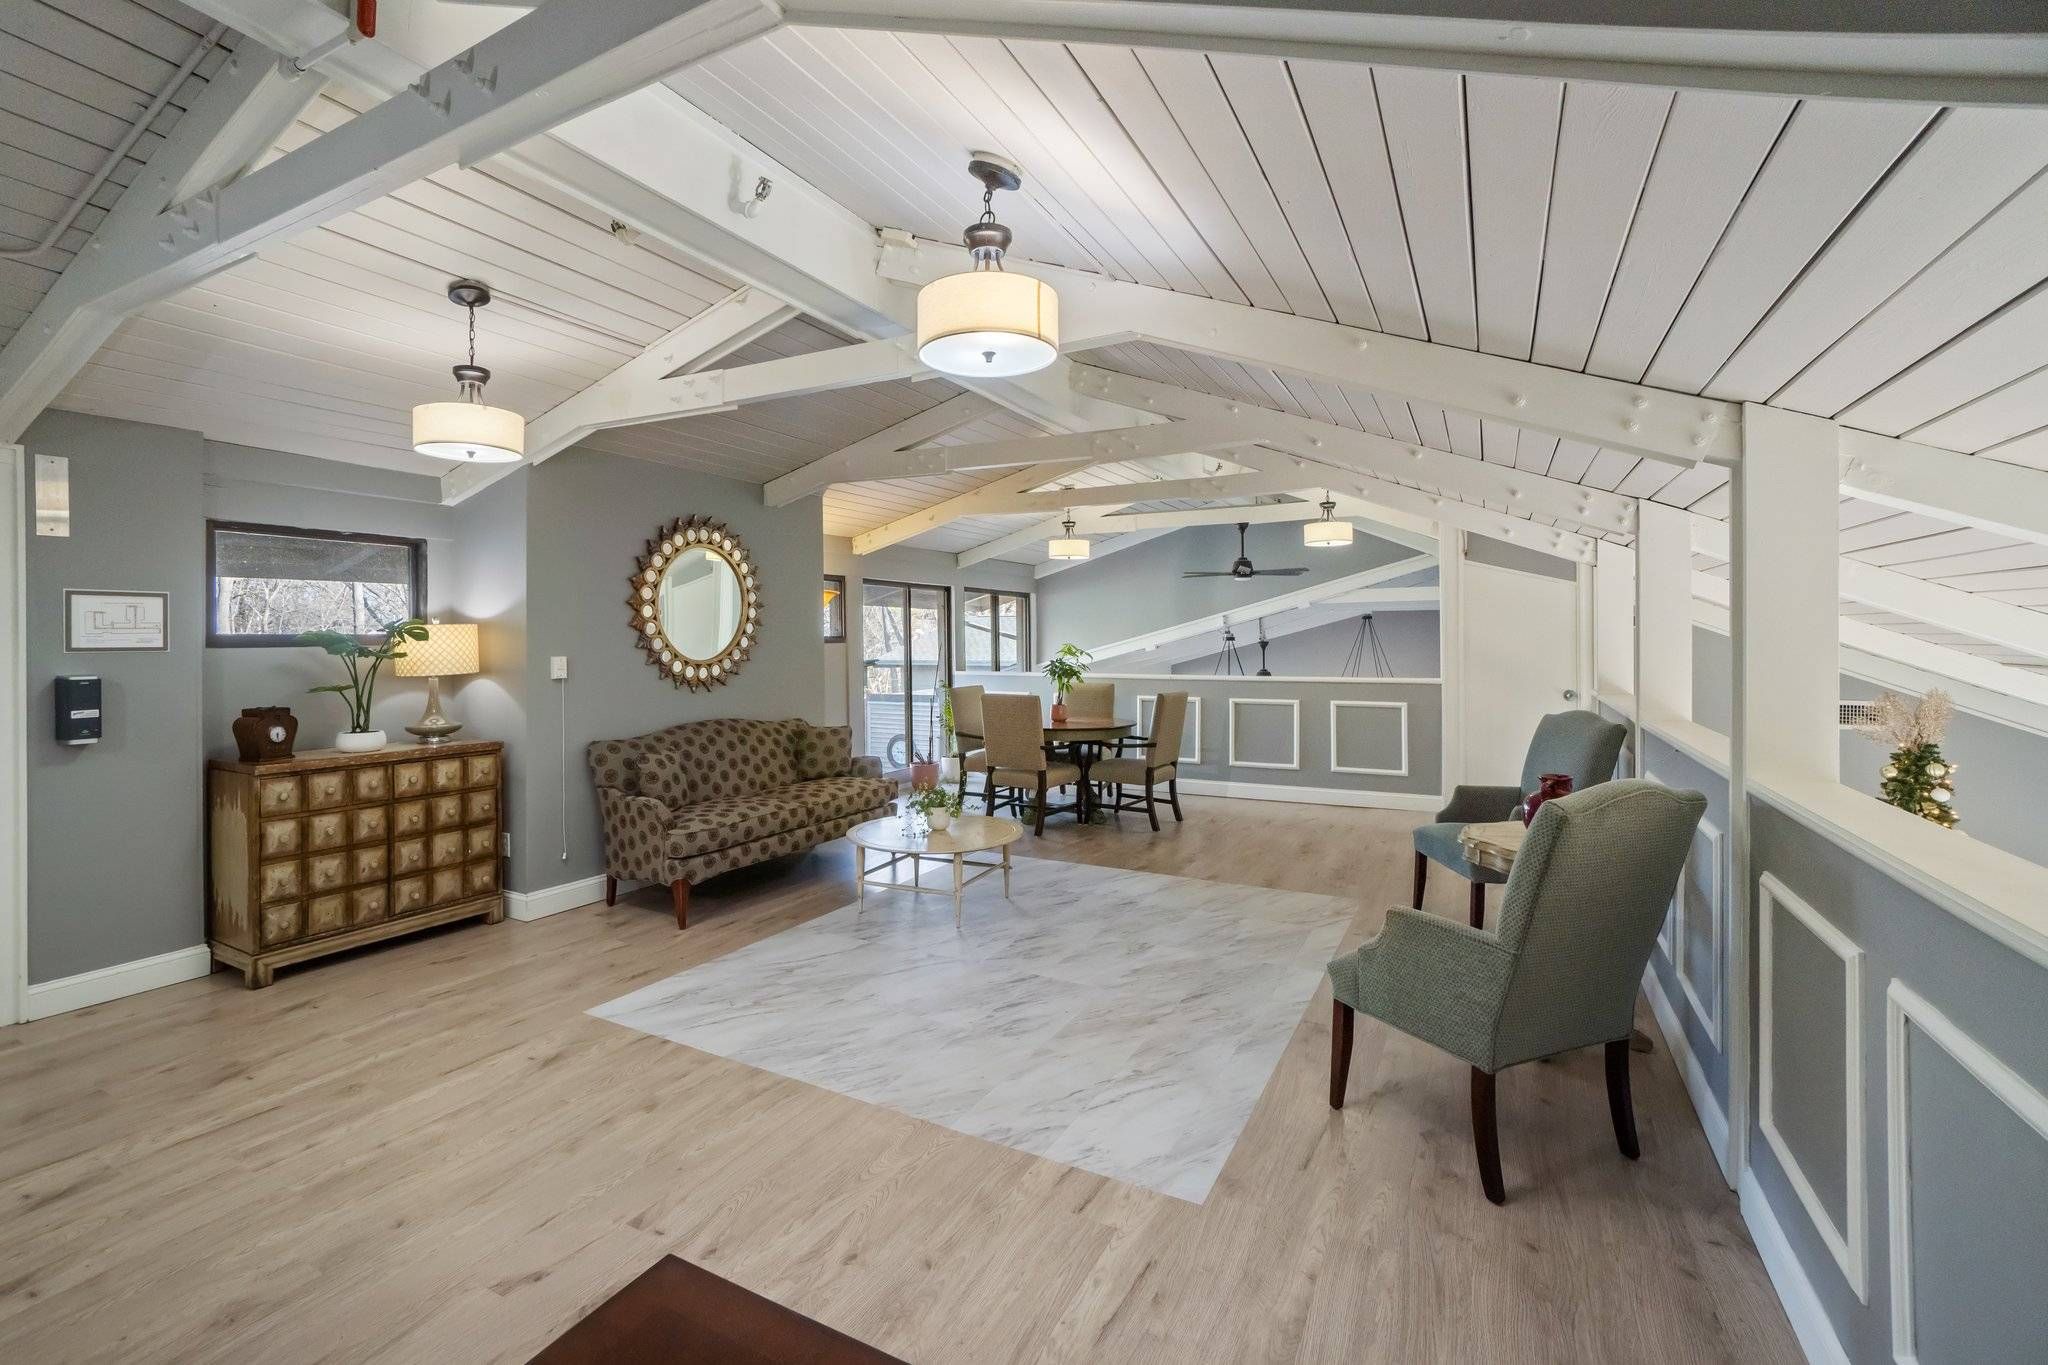 Interior view of Halcyon at West Bay senior living community featuring modern architecture and decor.